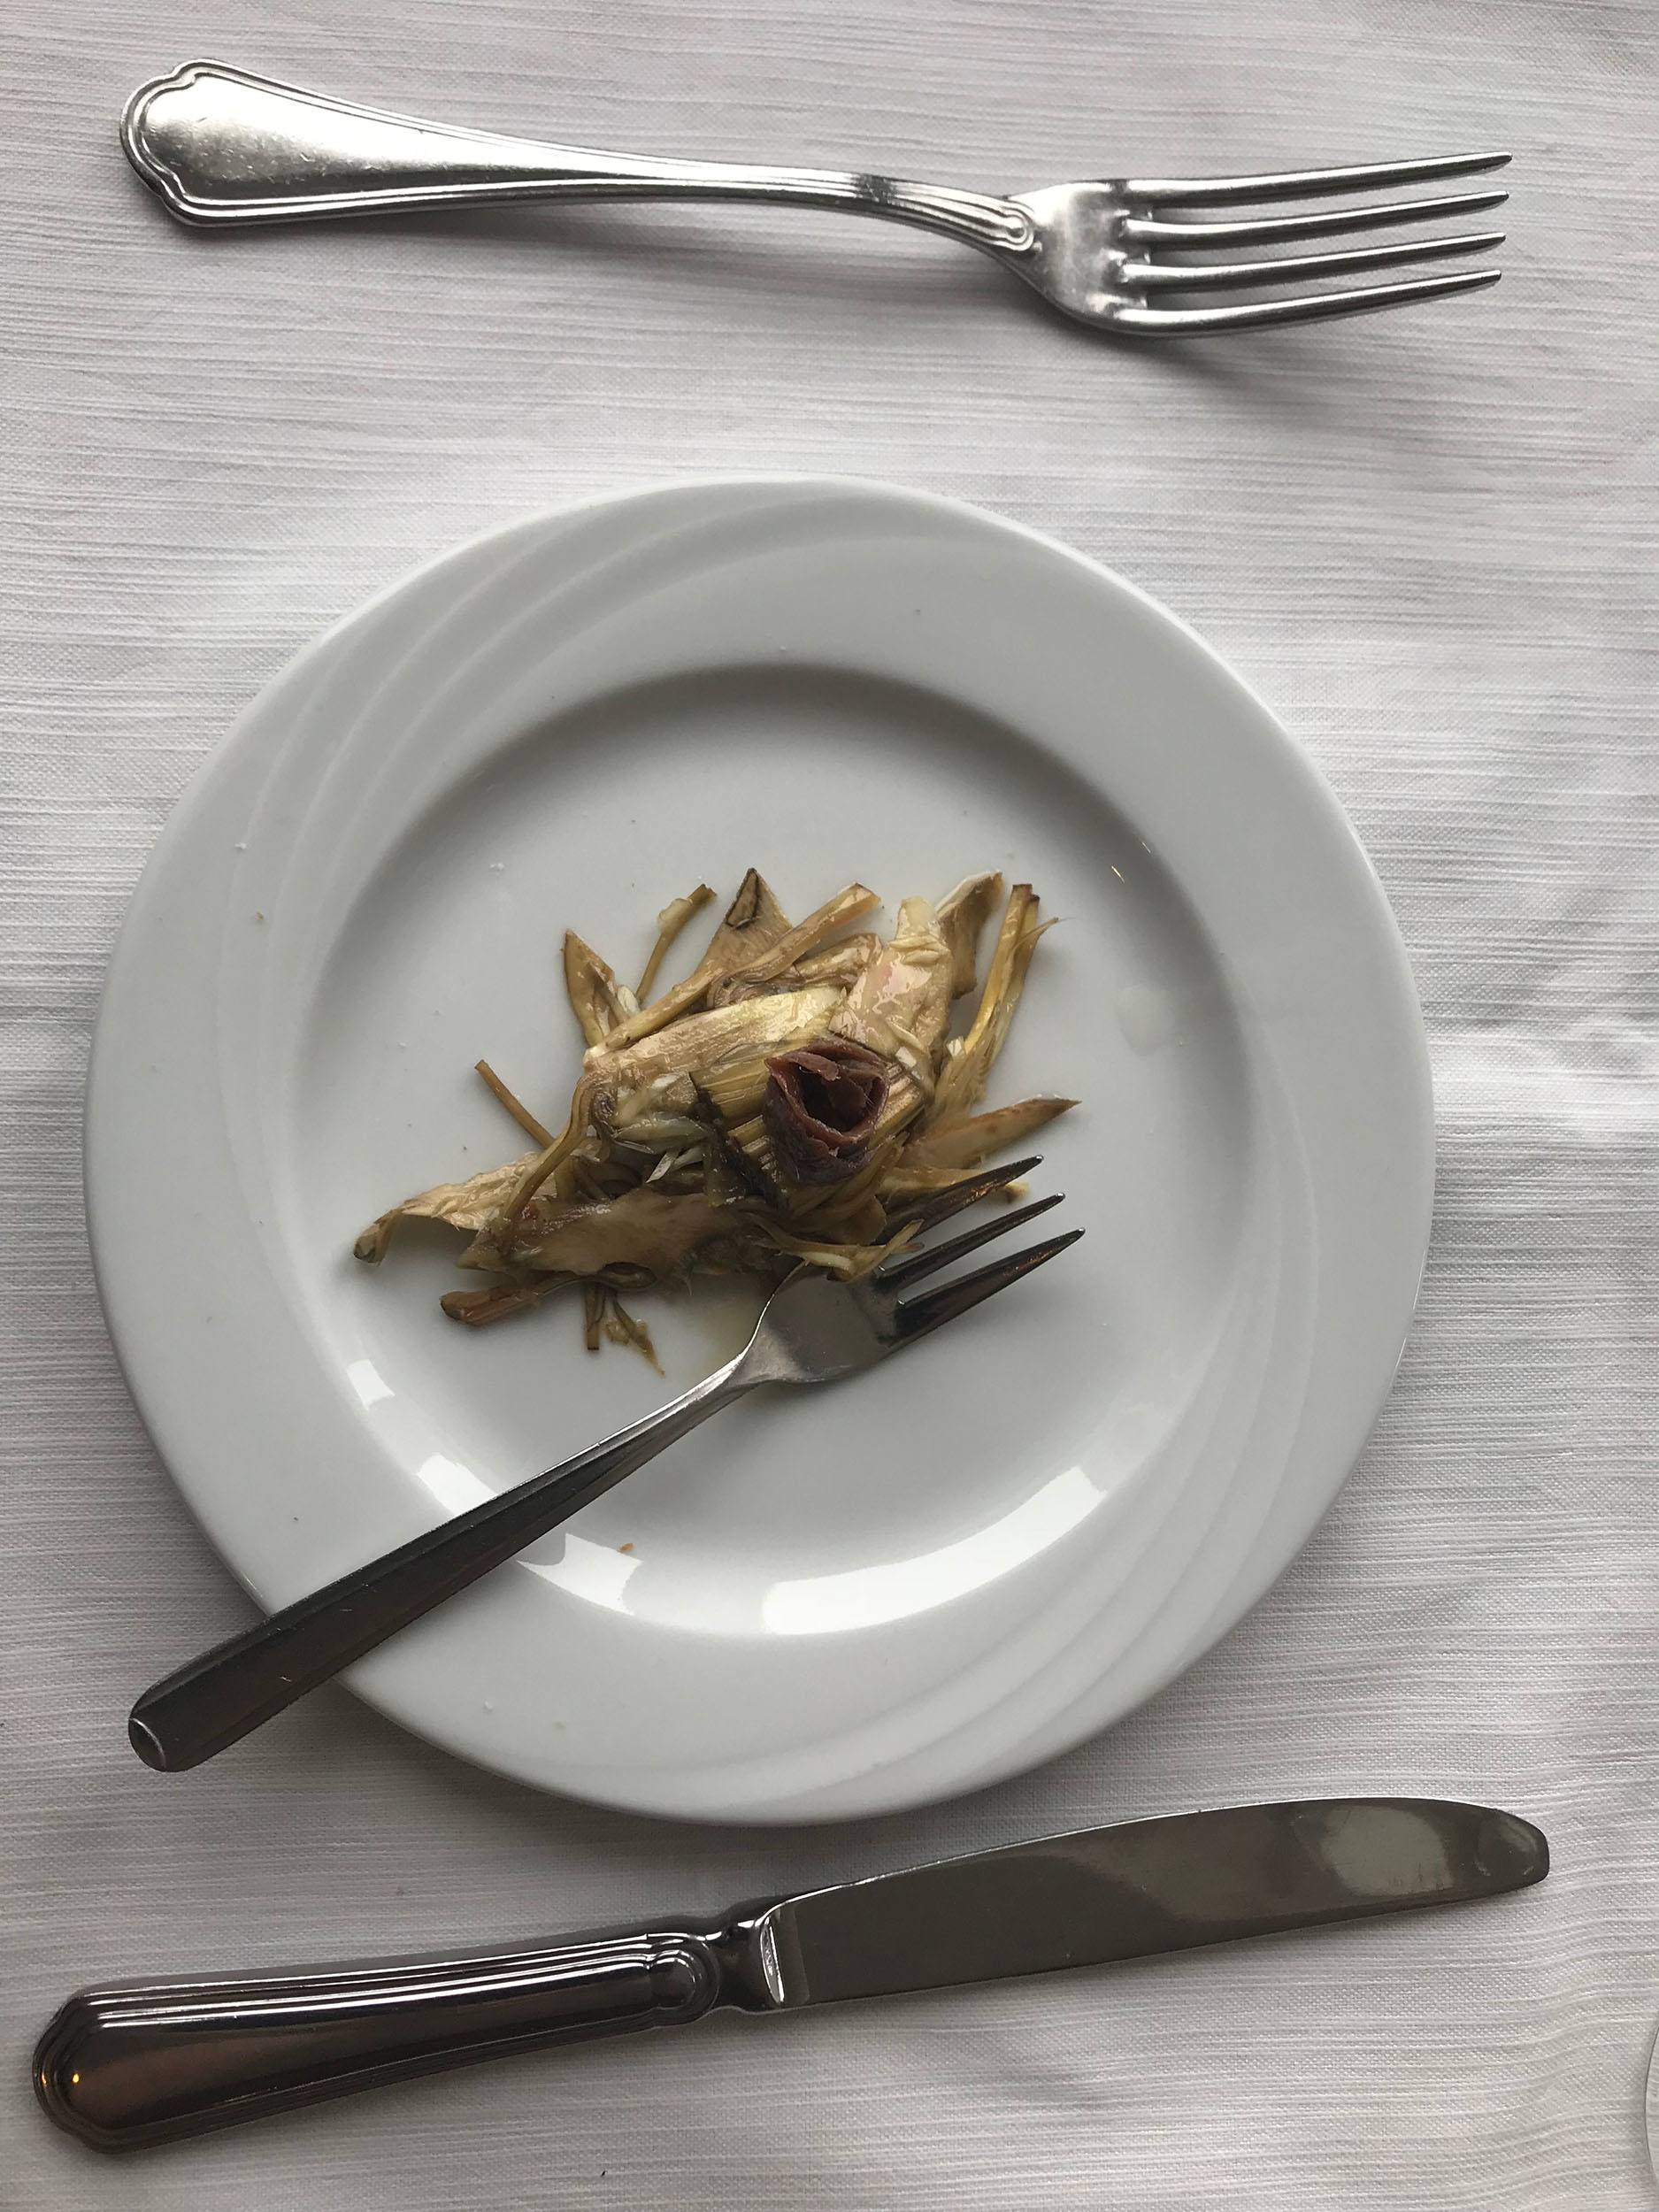 Cooked fennel at a restaurant in San Marino